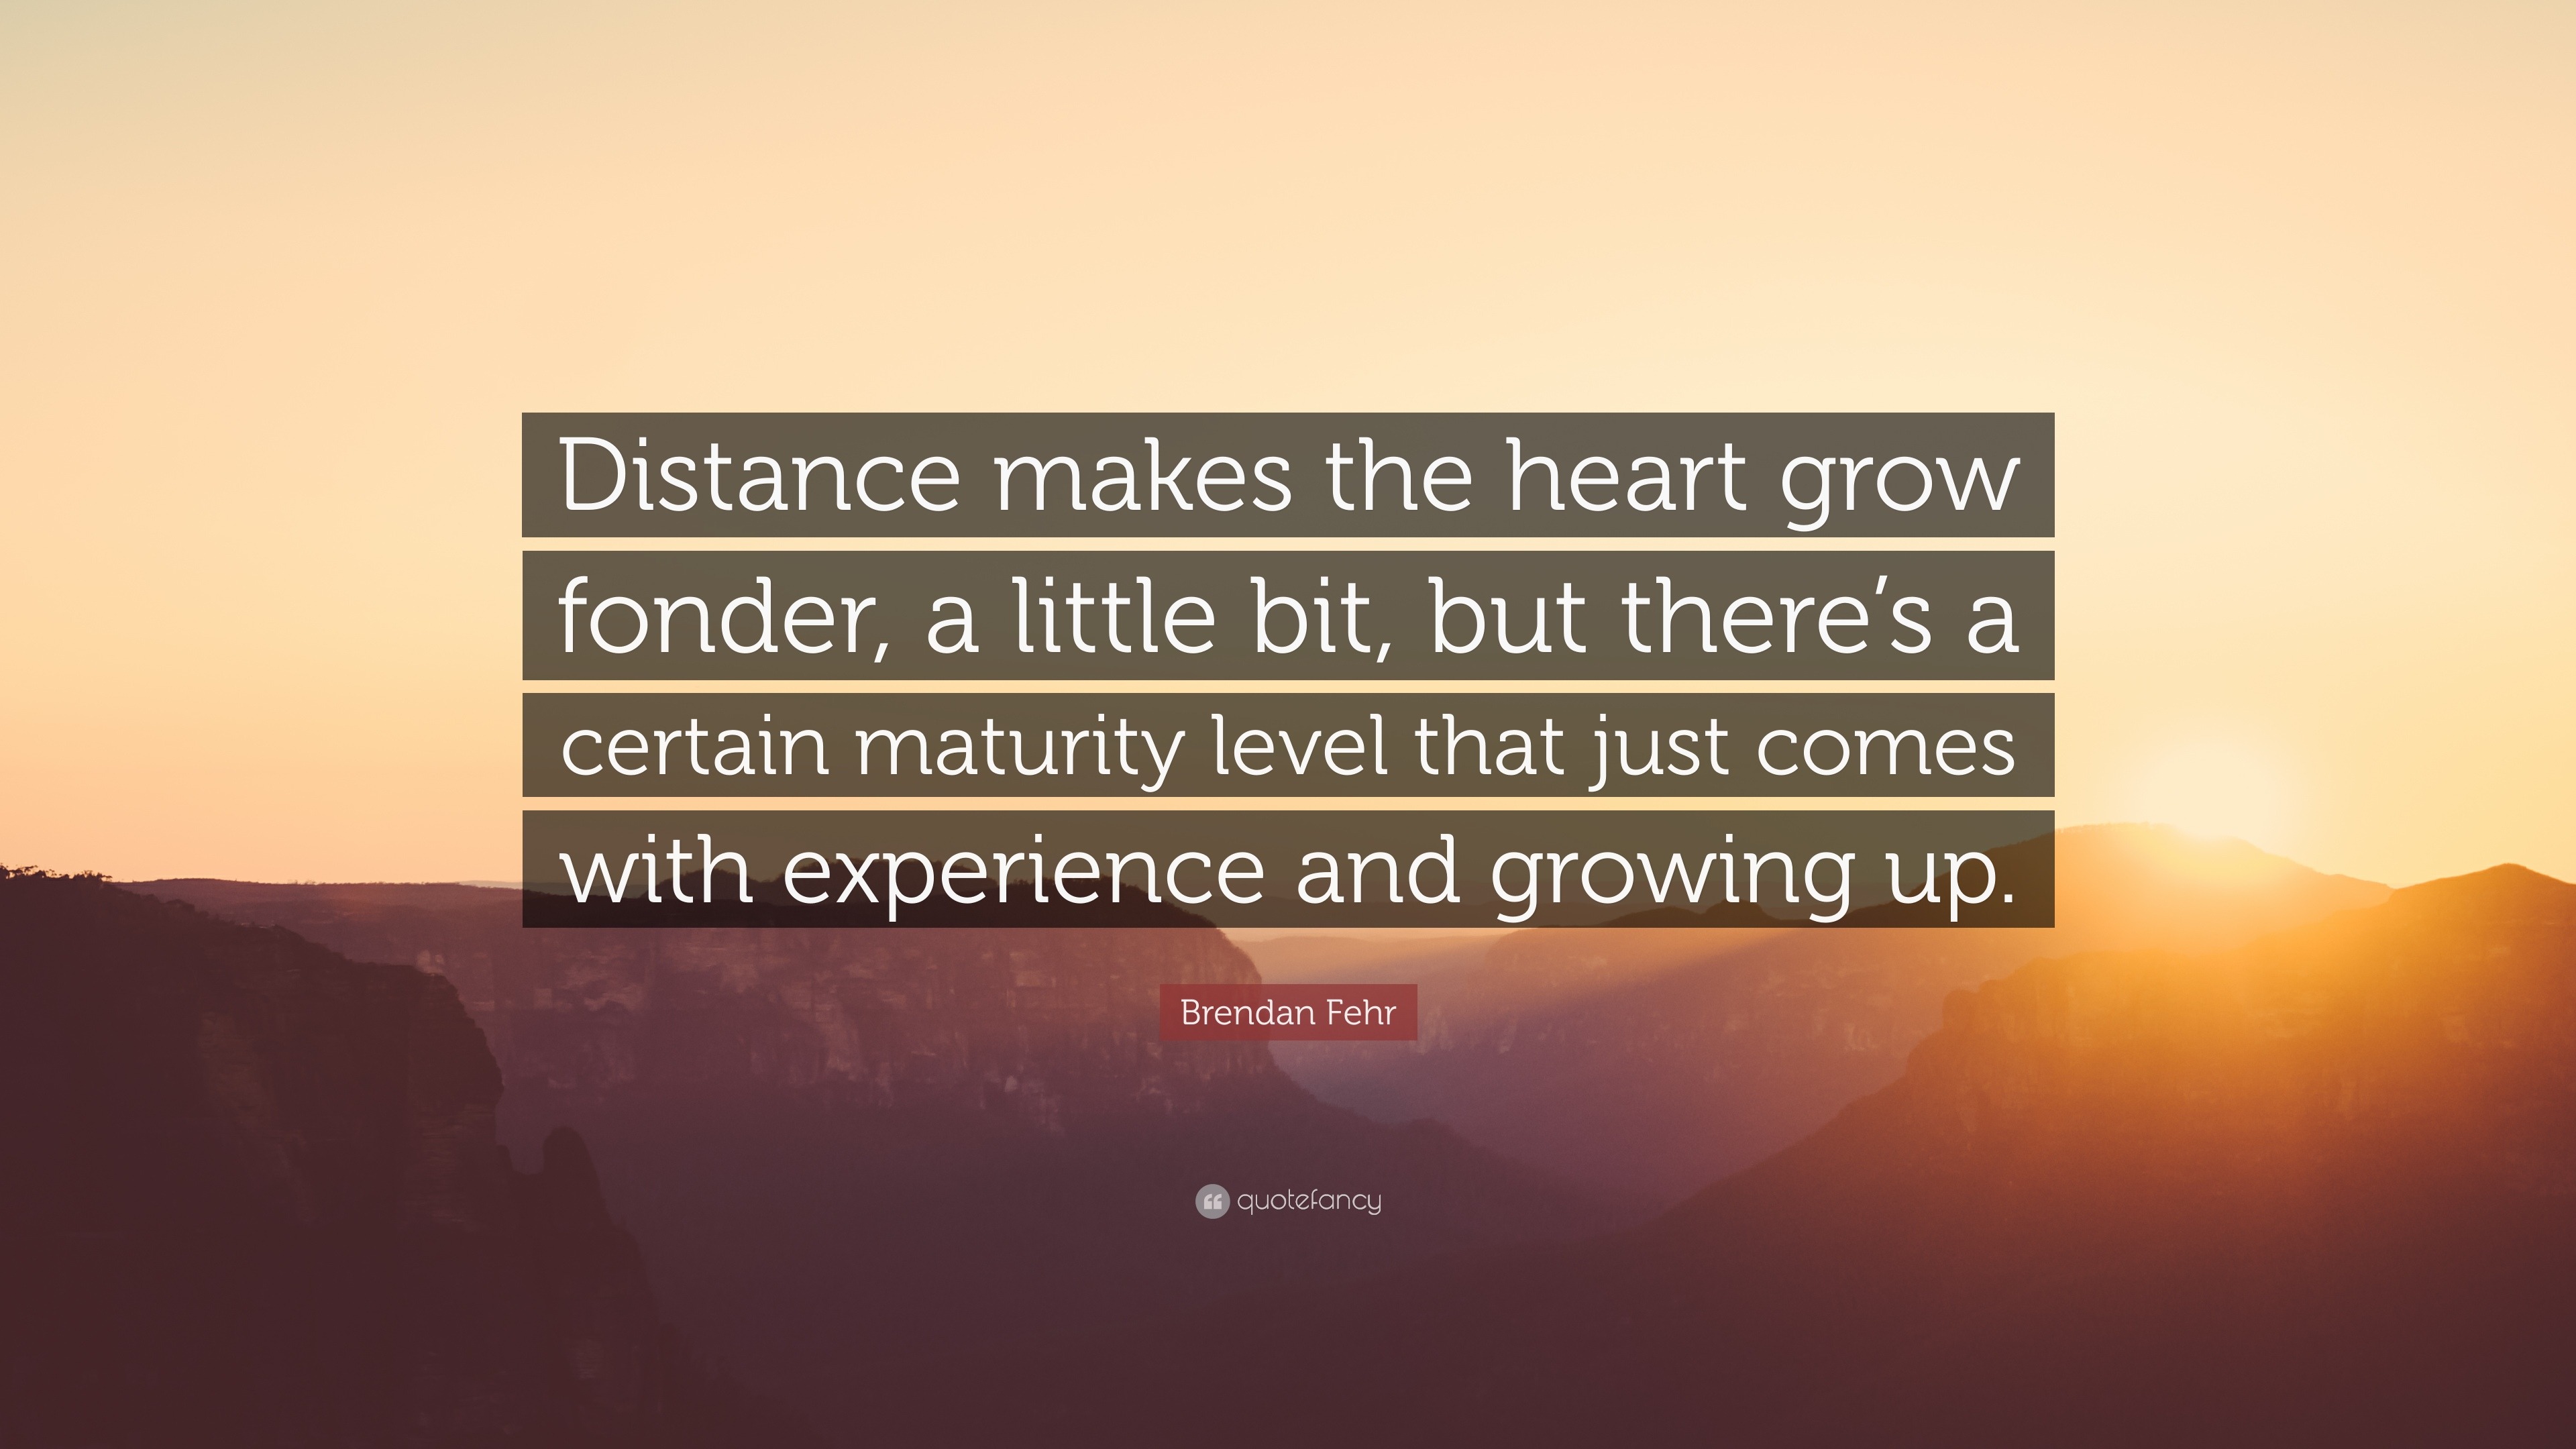 Brendan Fehr Quote Distance Makes The Heart Grow Fonder A Little Bit But There S A Certain Maturity Level That Just Comes With Experience 7 Wallpapers Quotefancy